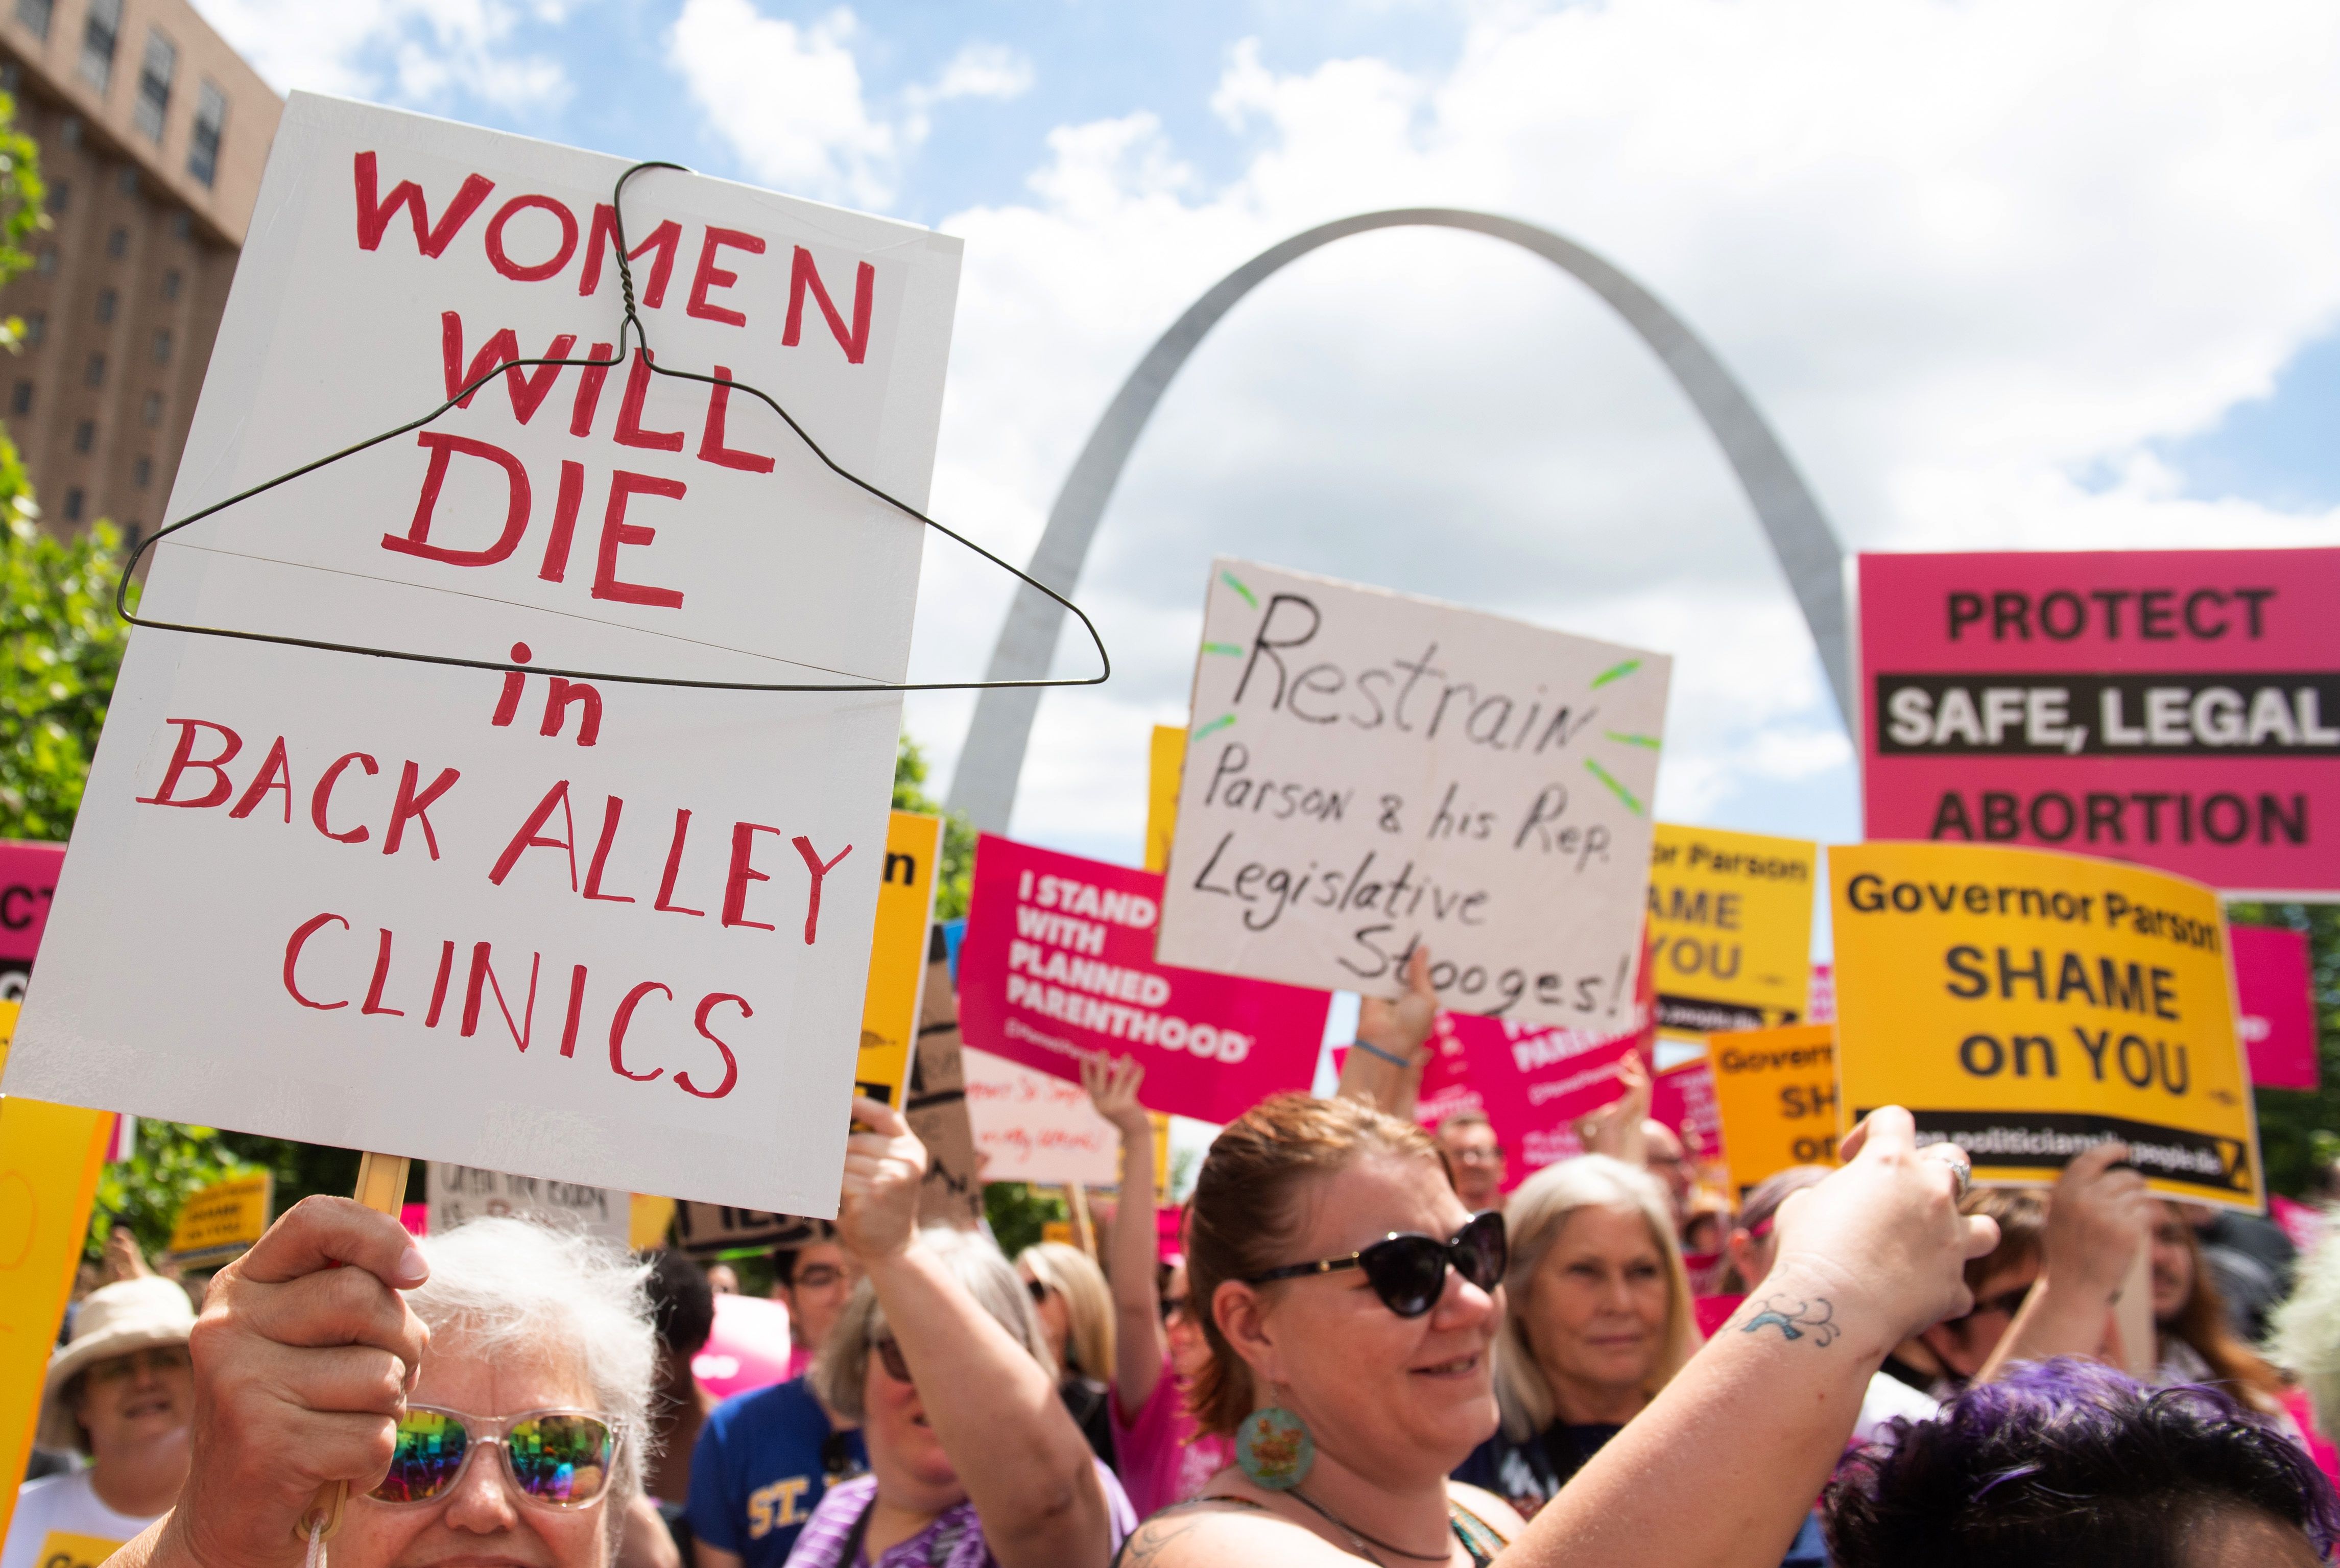 Protesters hold signs as they rally in support of Planned Parenthood and pro-choice and to protest a state decision that would effectively halt abortions by revoking the center's license to perform the procedure, near the Gateway Arch in St. Louis, Missouri, May 30, 2019. (Photo by SAUL LOEB / AFP) 